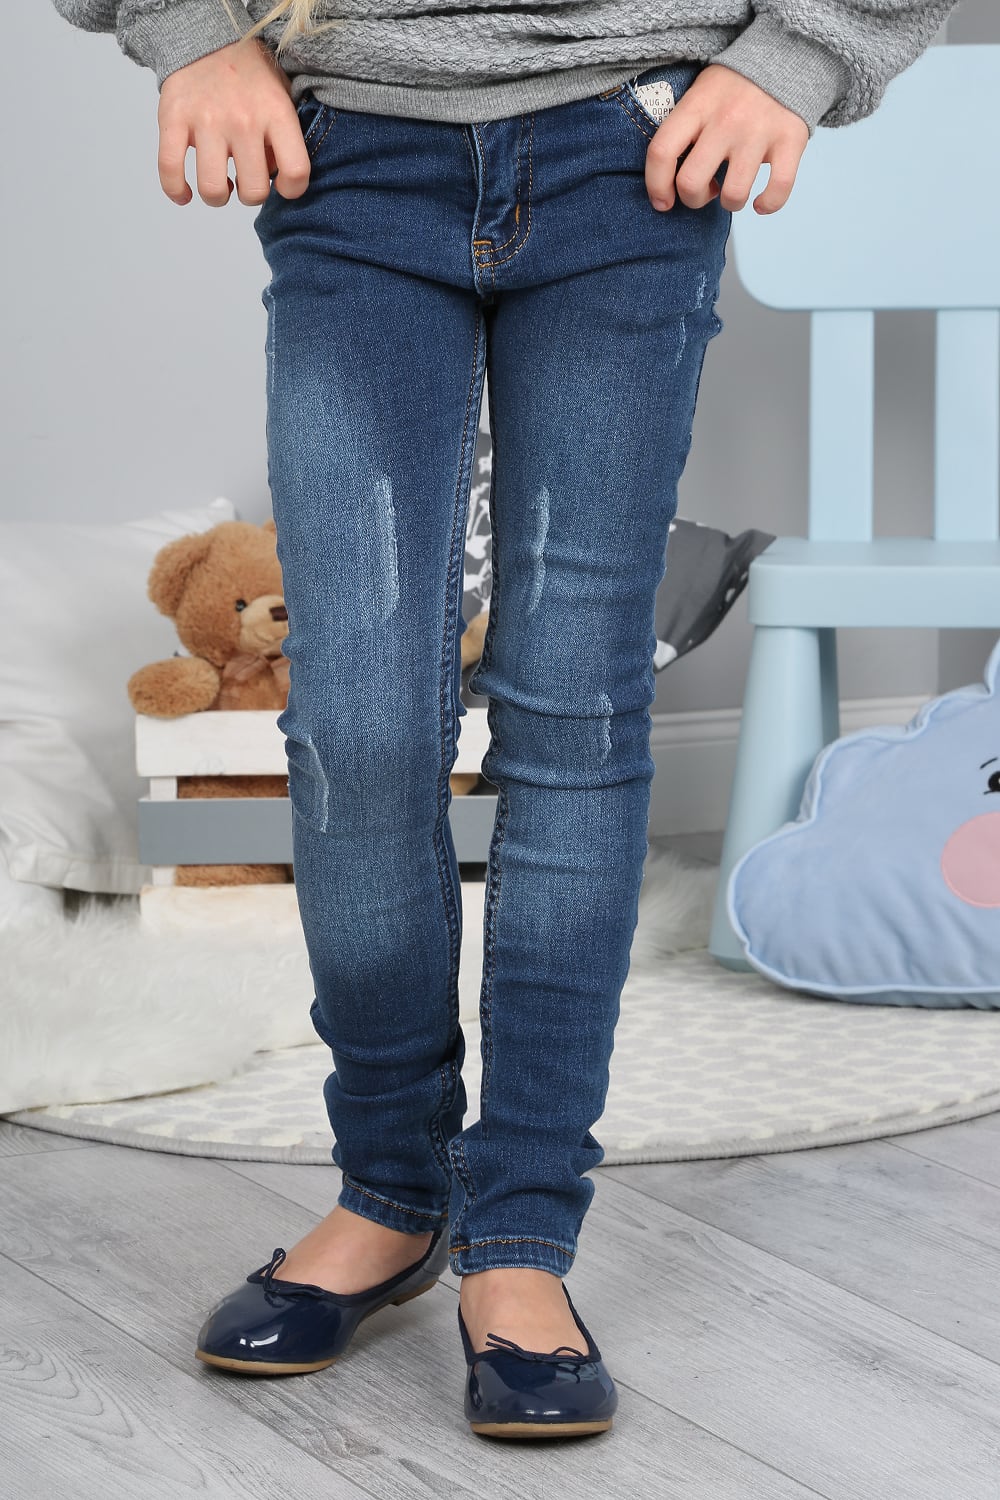 Girls' denim pants with abrasions